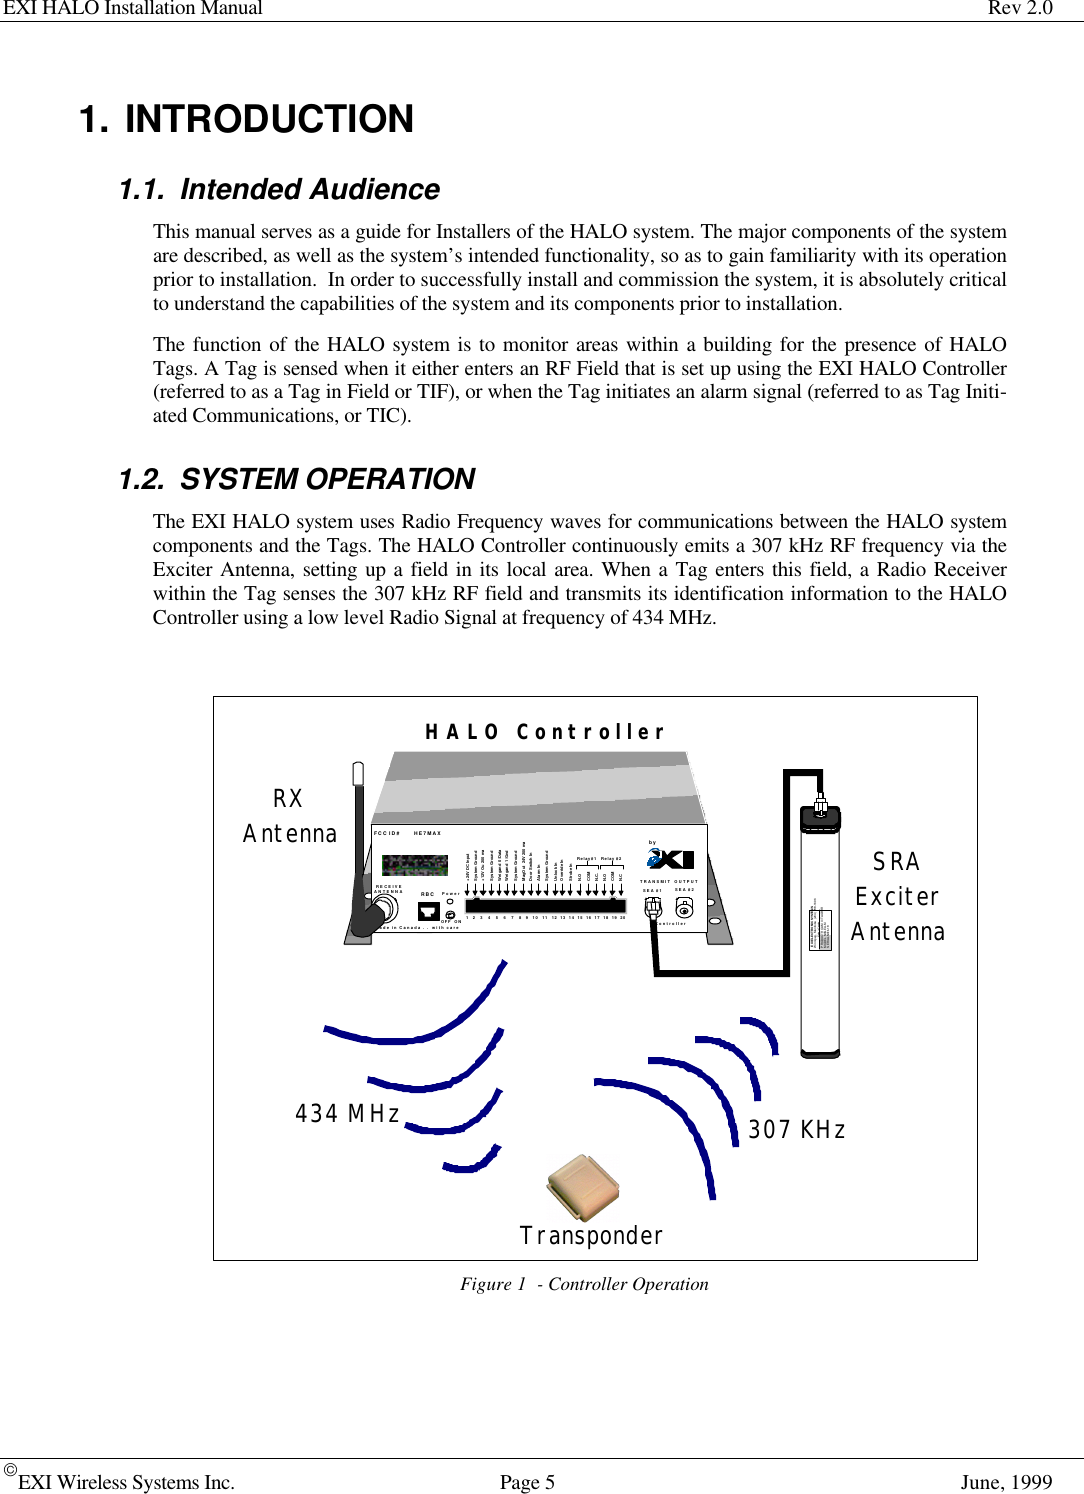 EXI HALO Installation Manual Rev 2.0EXI Wireless Systems Inc. Page 5June, 19991. INTRODUCTION1.1. Intended AudienceThis manual serves as a guide for Installers of the HALO system. The major components of the systemare described, as well as the system’s intended functionality, so as to gain familiarity with its operationprior to installation.  In order to successfully install and commission the system, it is absolutely criticalto understand the capabilities of the system and its components prior to installation.The function of the HALO system is to monitor areas within a building for the presence of HALOTags. A Tag is sensed when it either enters an RF Field that is set up using the EXI HALO Controller(referred to as a Tag in Field or TIF), or when the Tag initiates an alarm signal (referred to as Tag Initi-ated Communications, or TIC).1.2. SYSTEM OPERATIONThe EXI HALO system uses Radio Frequency waves for communications between the HALO systemcomponents and the Tags. The HALO Controller continuously emits a 307 kHz RF frequency via theExciter Antenna, setting up a field in its local area. When a Tag enters this field, a Radio Receiverwithin the Tag senses the 307 kHz RF field and transmits its identification information to the HALOController using a low level Radio Signal at frequency of 434 MHz.Figure 1  - Controller OperationRECEIVEANTENNA RBCFCC ID#          HE7MAXTRANSMIT  OUTPUTSEA #1 SEA #2Made in Canada . .  with care ControllerbyPower1    2     3     4     5     6     7     8    9    10    11    12   13   14   15   16   17   18   19   20+24V DC InputSystem Ground+12V Ou 200 maSystem GroundWeigand  0/DataWeigand  1/GndSystem GroundMagOut  24V 200 maDoor Switch InSystem GroundUnlock InOverride InStrobe InN.OCOMN.C.N.OCOMN.CRelay #1 Relay #2Alarm InOFF  ONEXI ELECTRONIC SYSTEMSWinnipeg, Manitoba  (204) 788-1696Made in CanadaPRODUCTMODEL NO.SERIAL NO&gt;ROAM  II/TAGRRRSEA-M1118HALO ControllerRXAntenna SRAExciterAntenna434 MHz 307 KHzTransponder